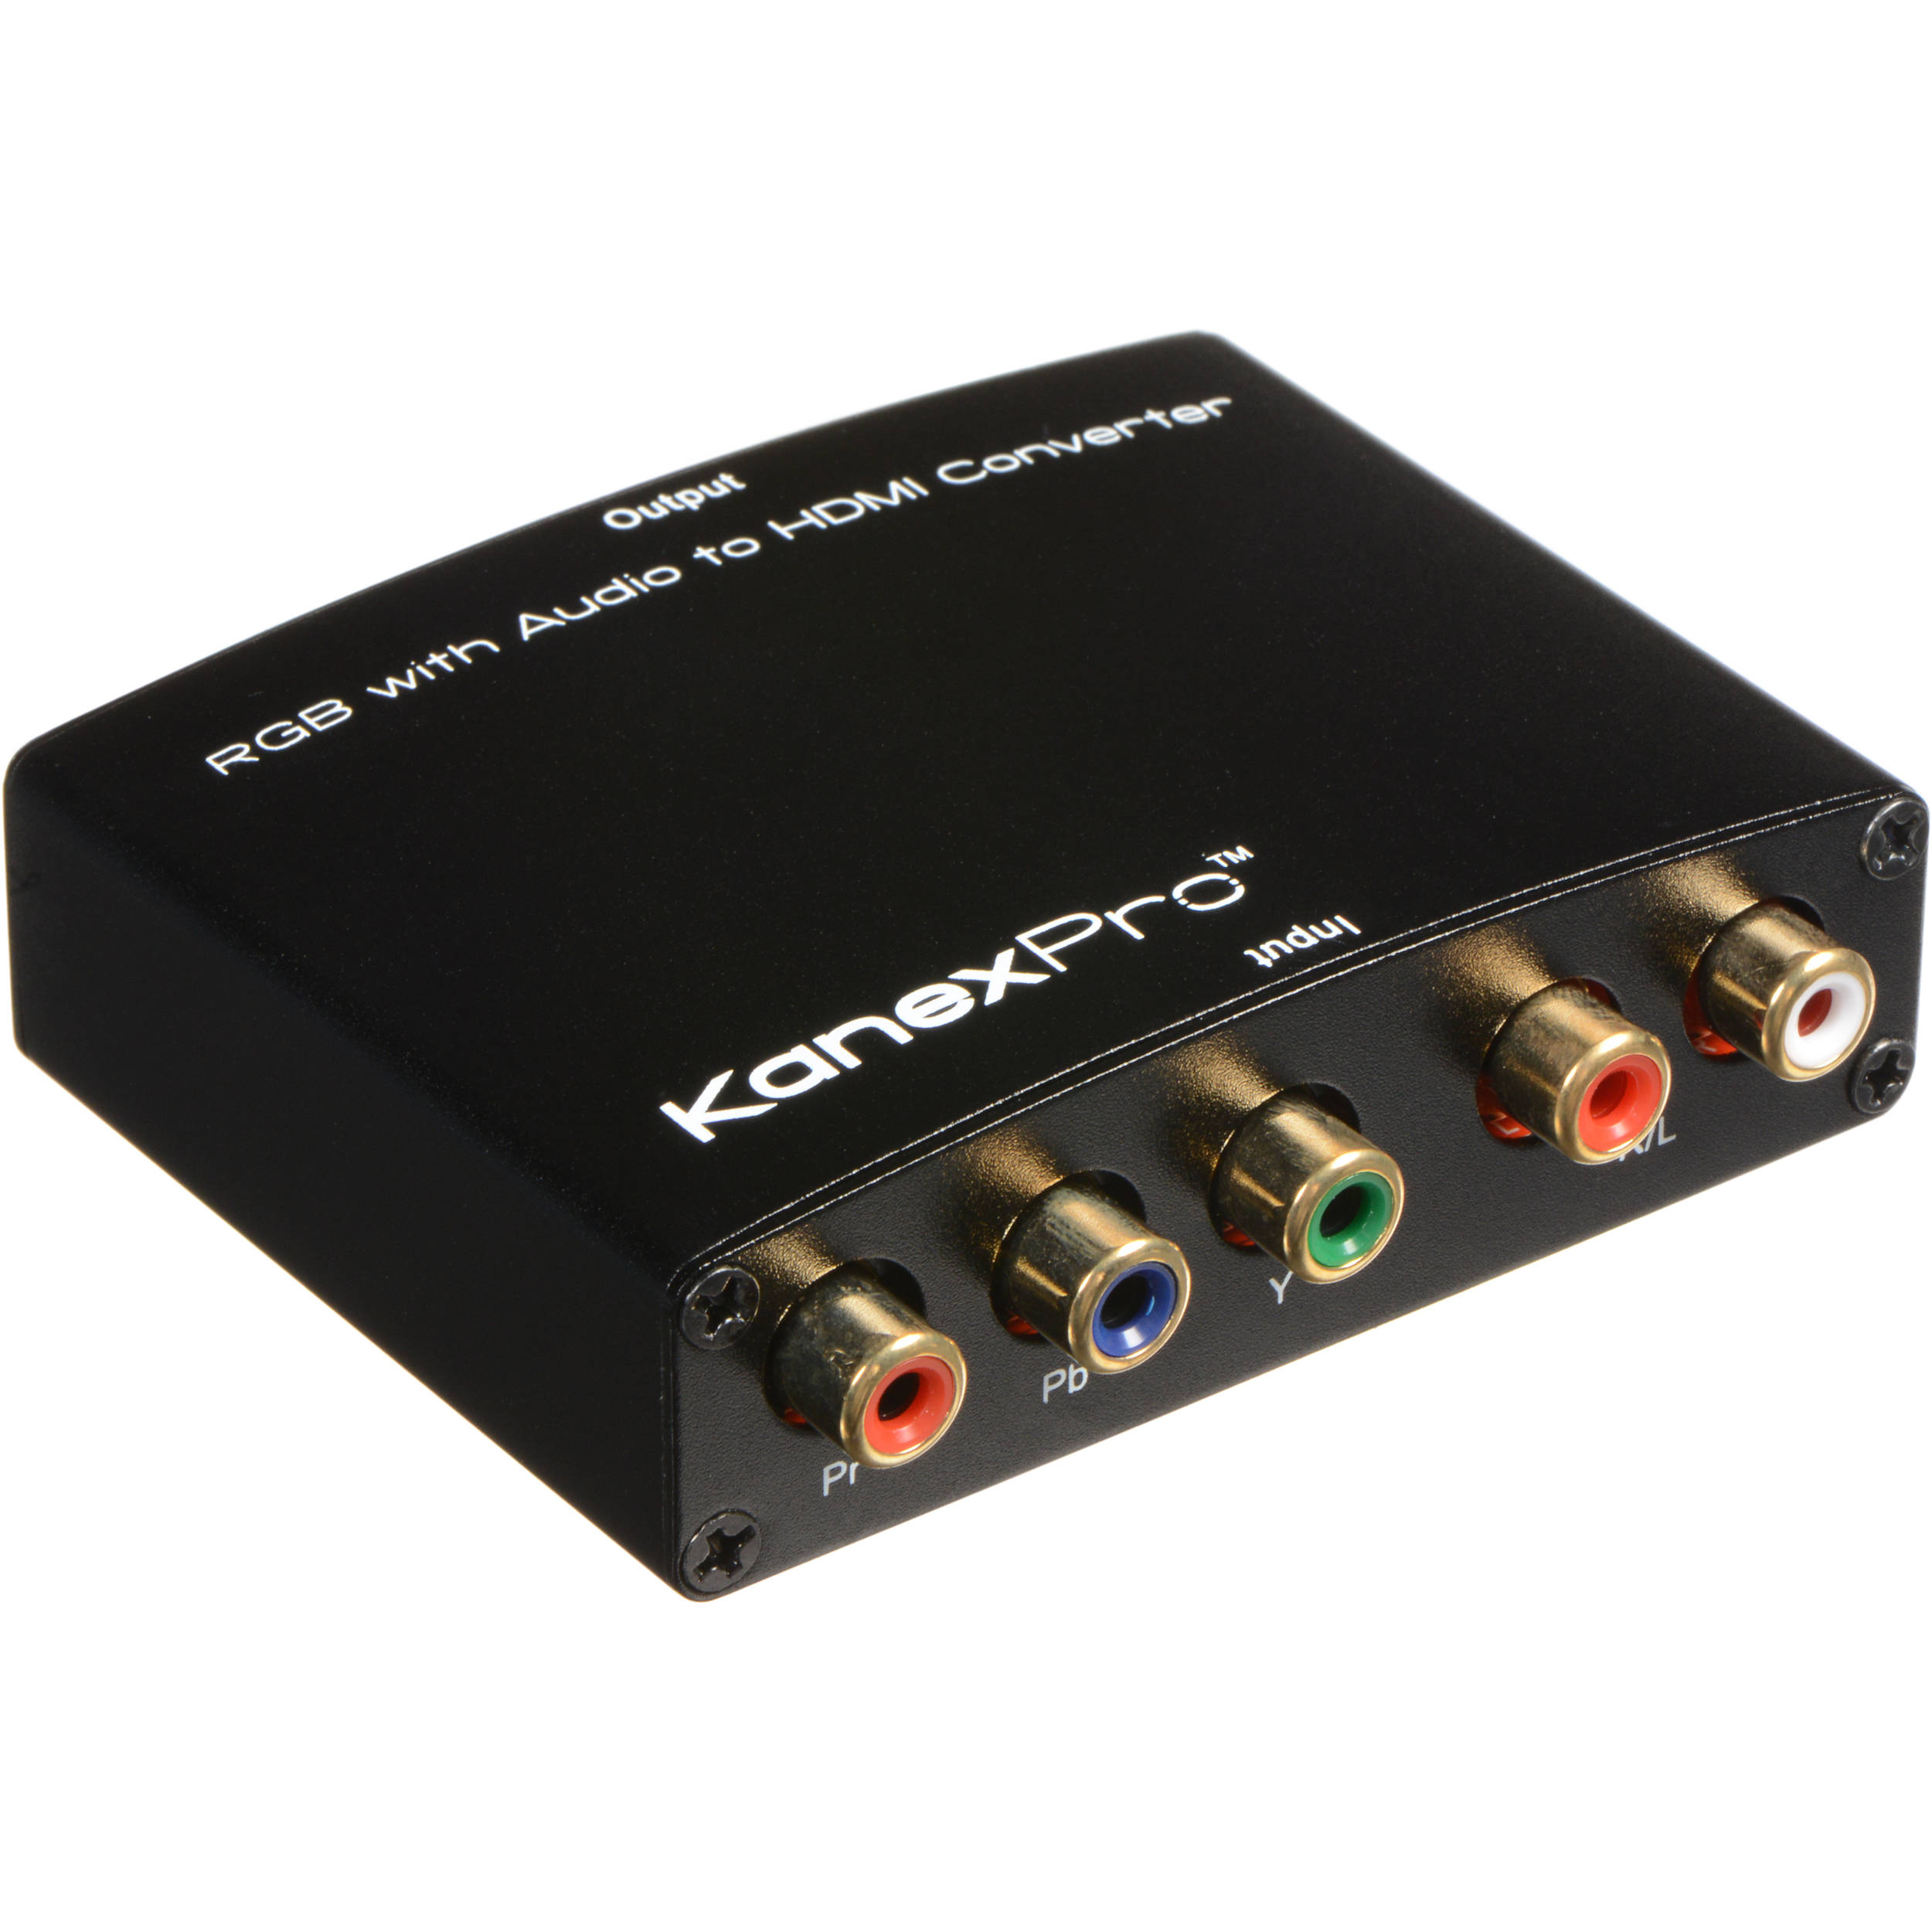 Kanexpro Component To Hdmi Audio Video Converter Rgbrlhd B H